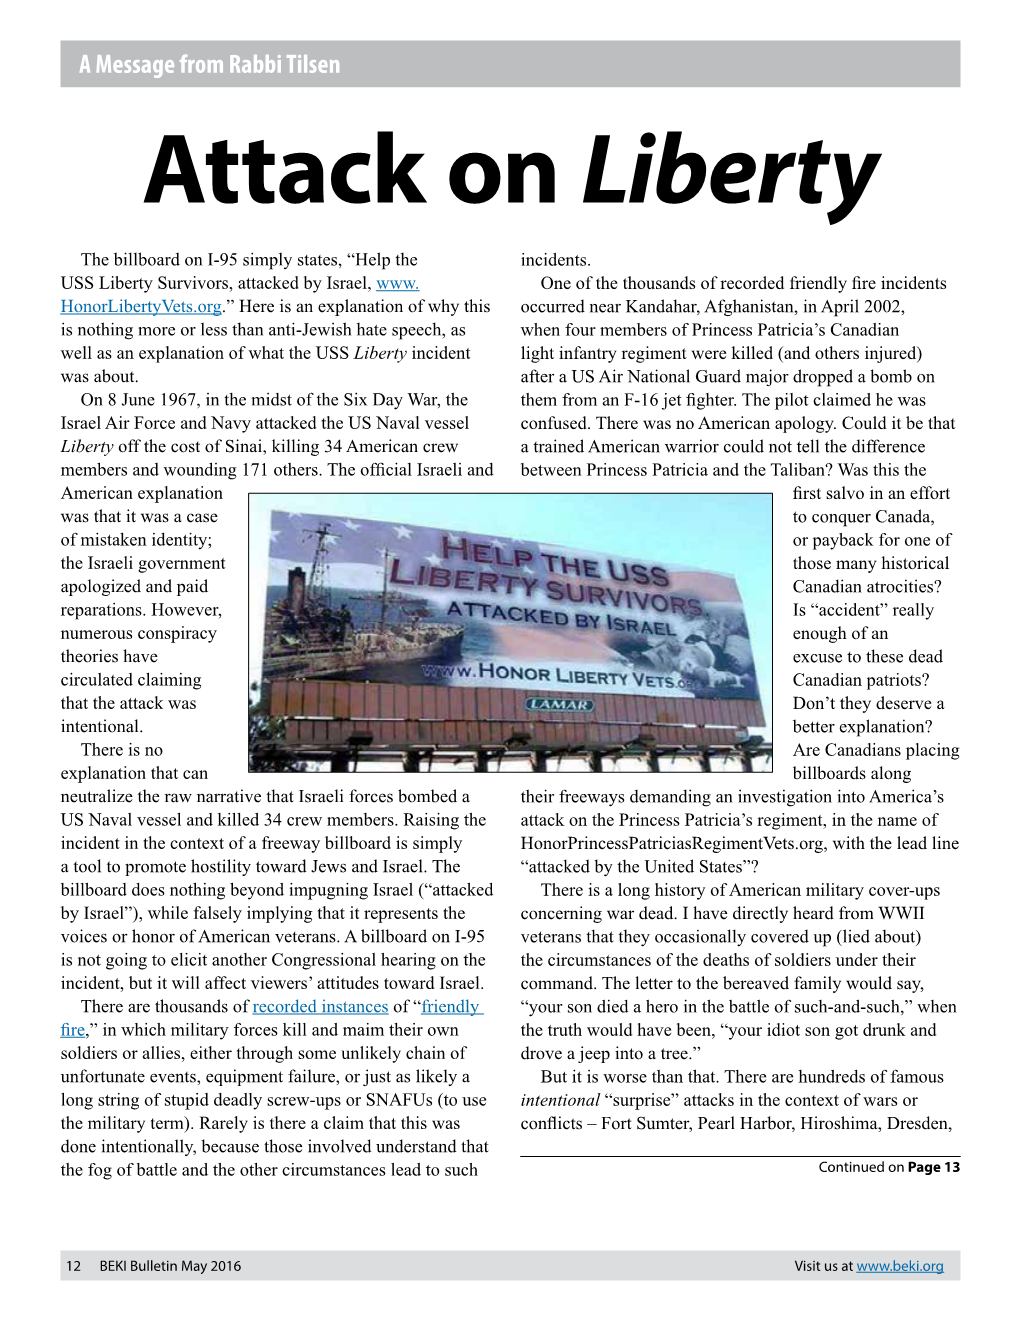 Attack on Liberty